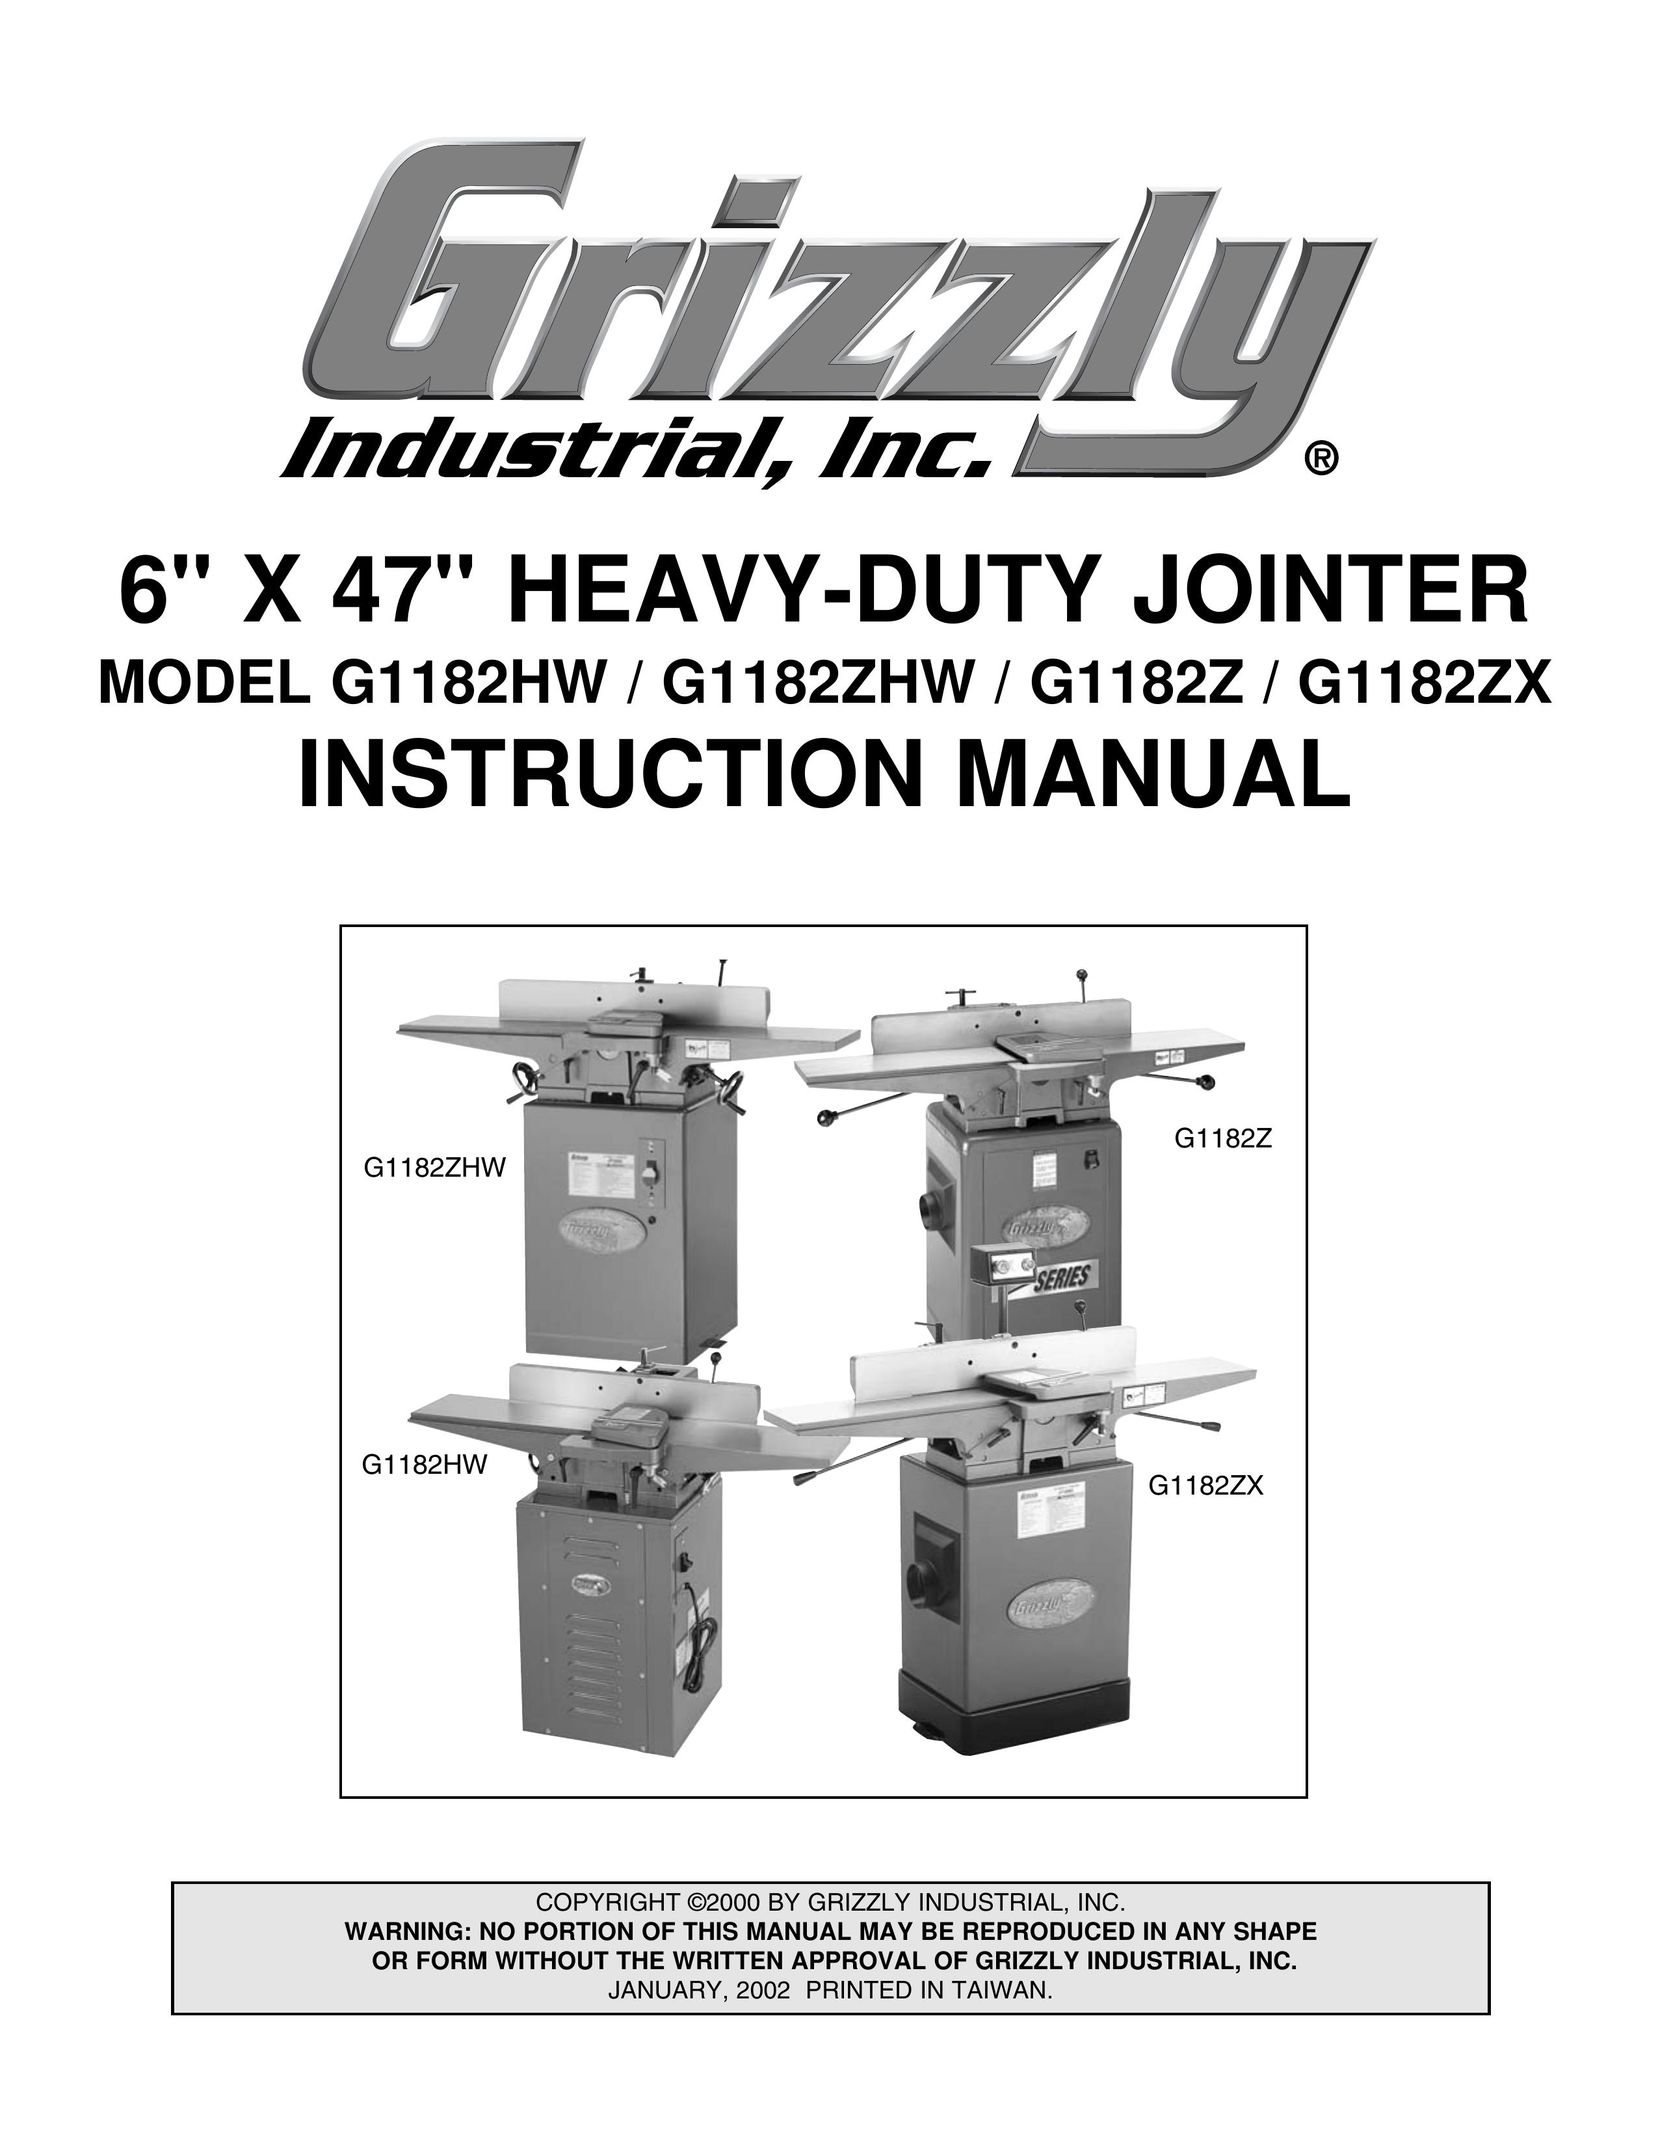 Grizzly G1182ZHW Biscuit Joiner User Manual